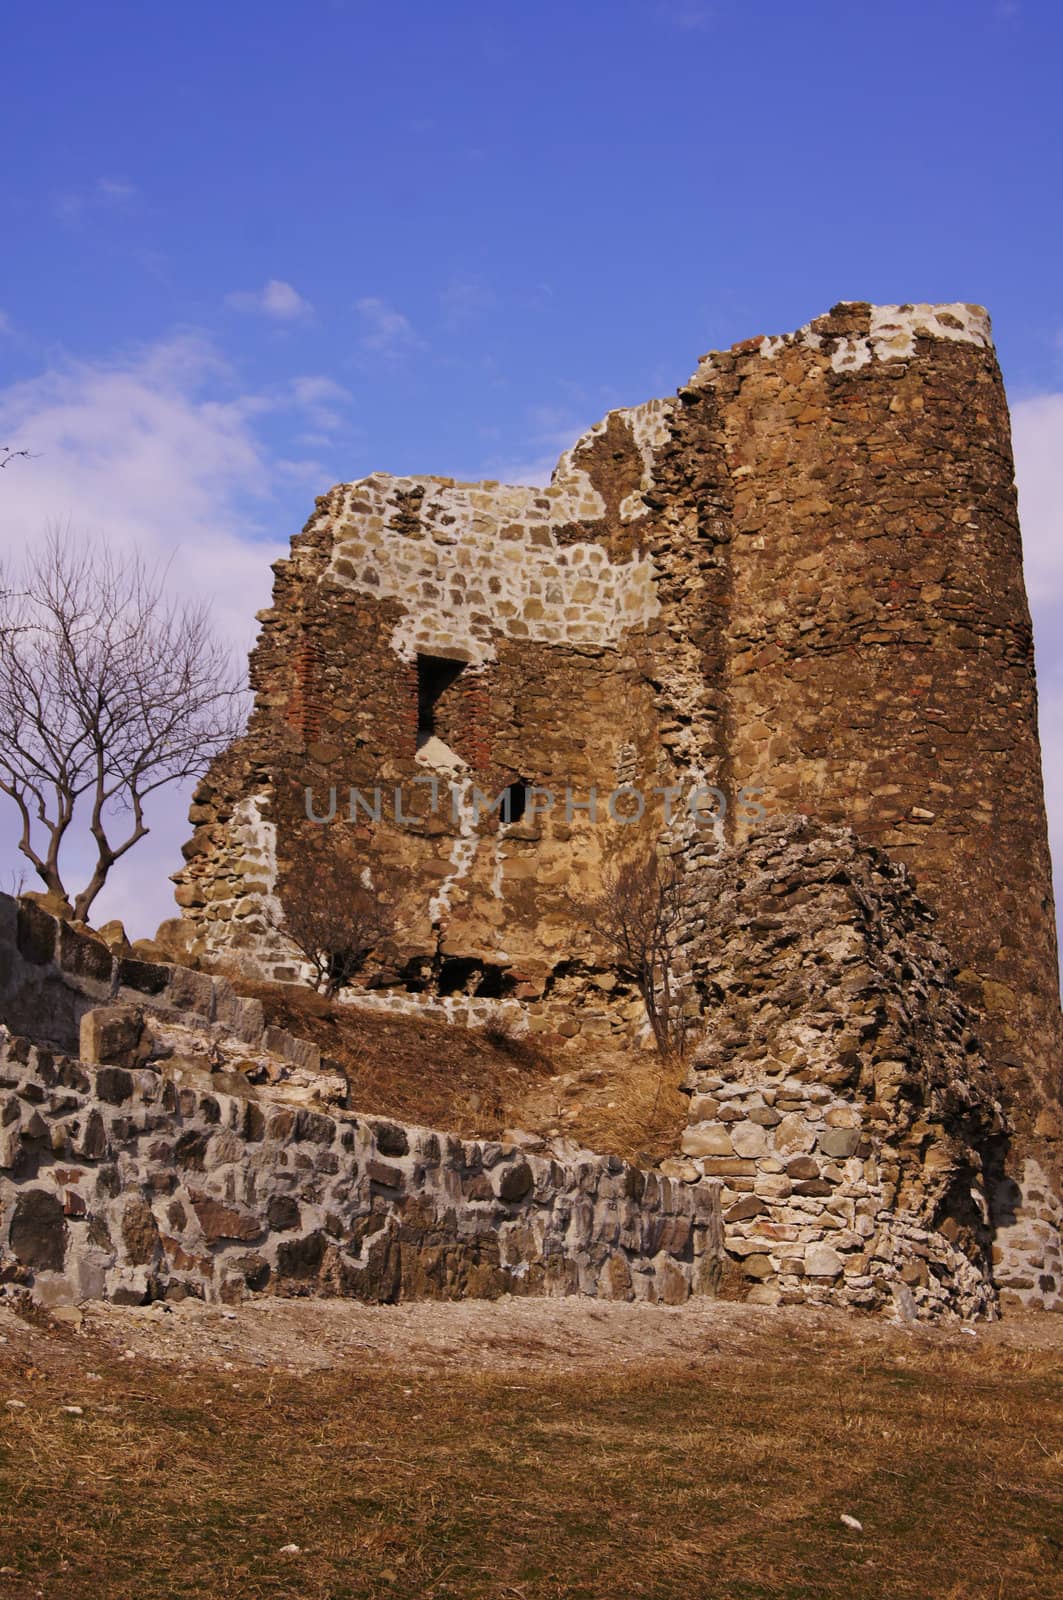 Exterior of ruins of Jvari, which is a Georgian Orthodox monastery of the 6th century near Mtskheta (World Heritage site) - the most famous symbol of georgiam christianity